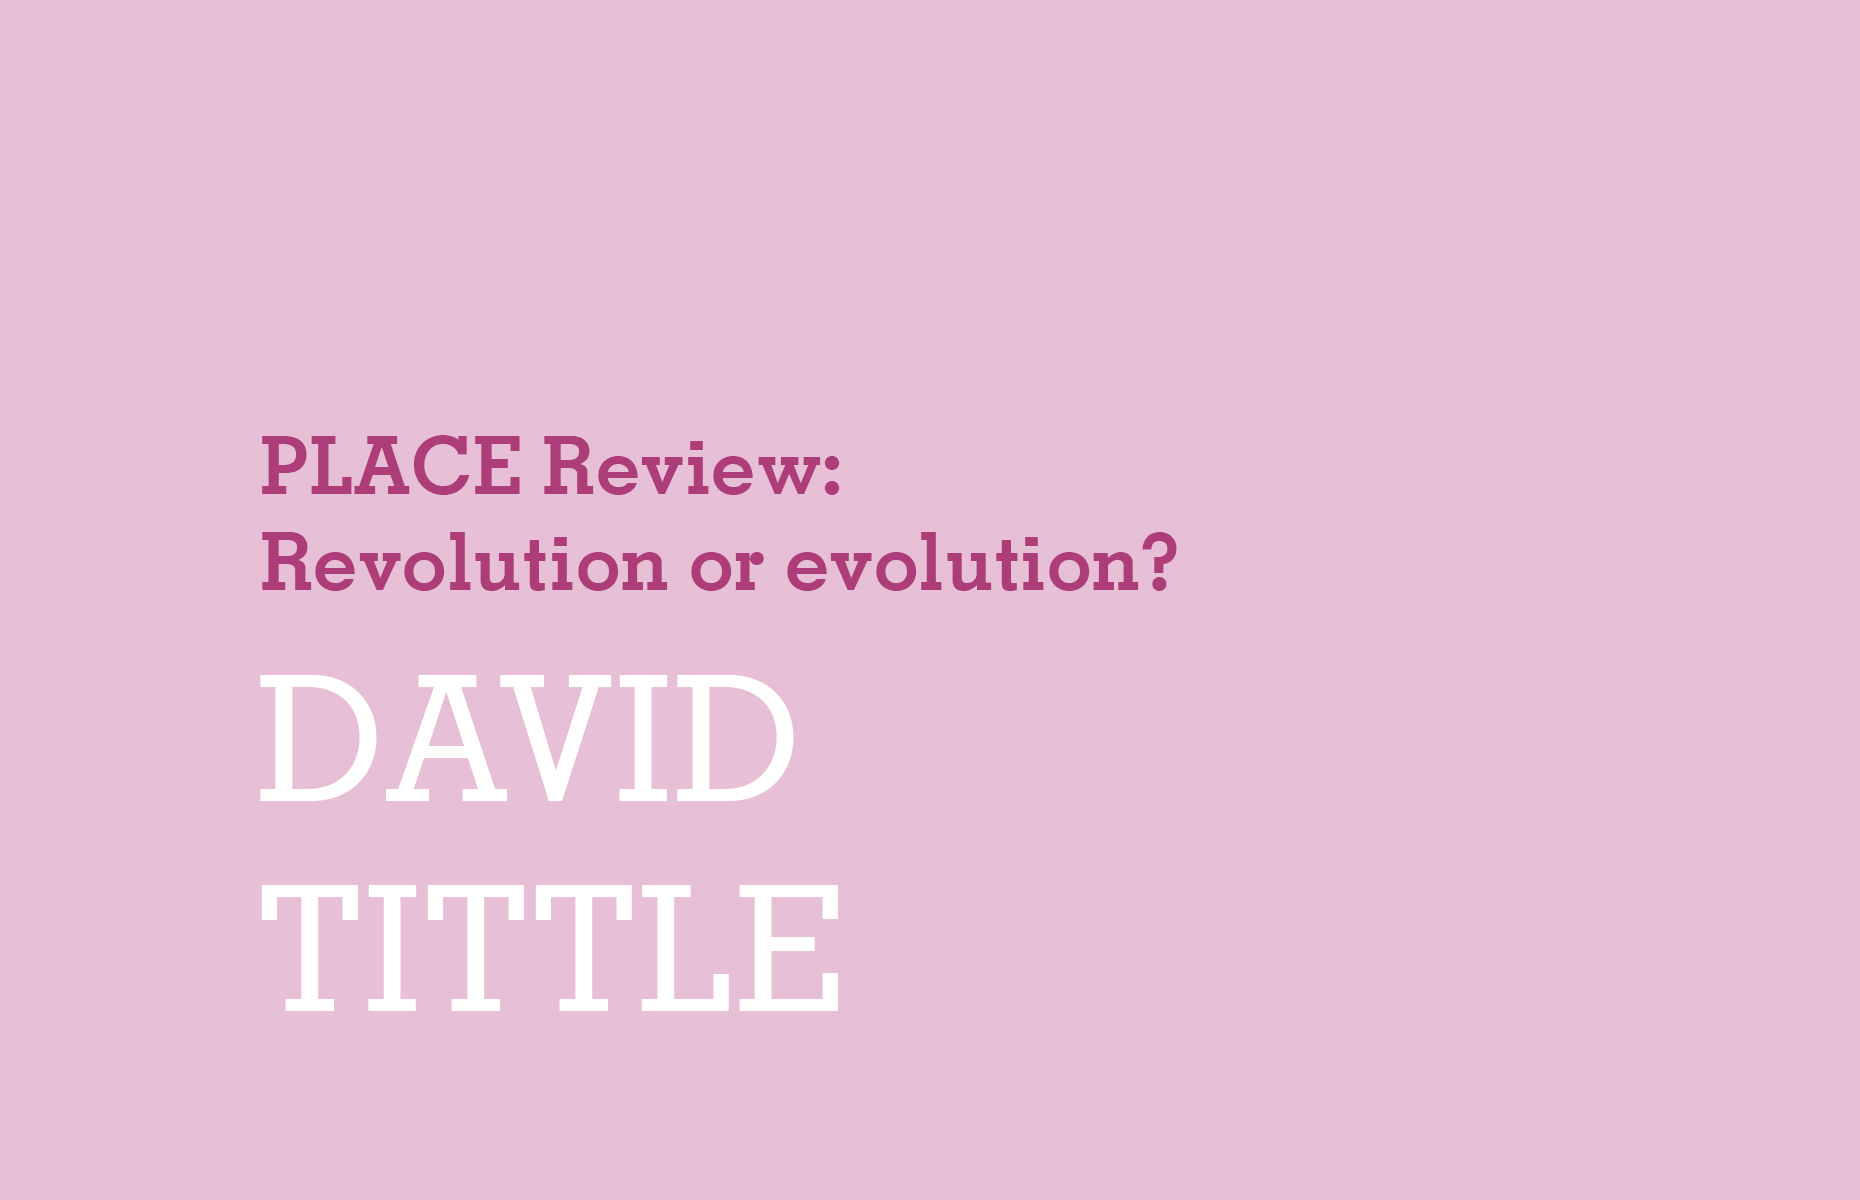 PLACE Review: Revolution or evolution